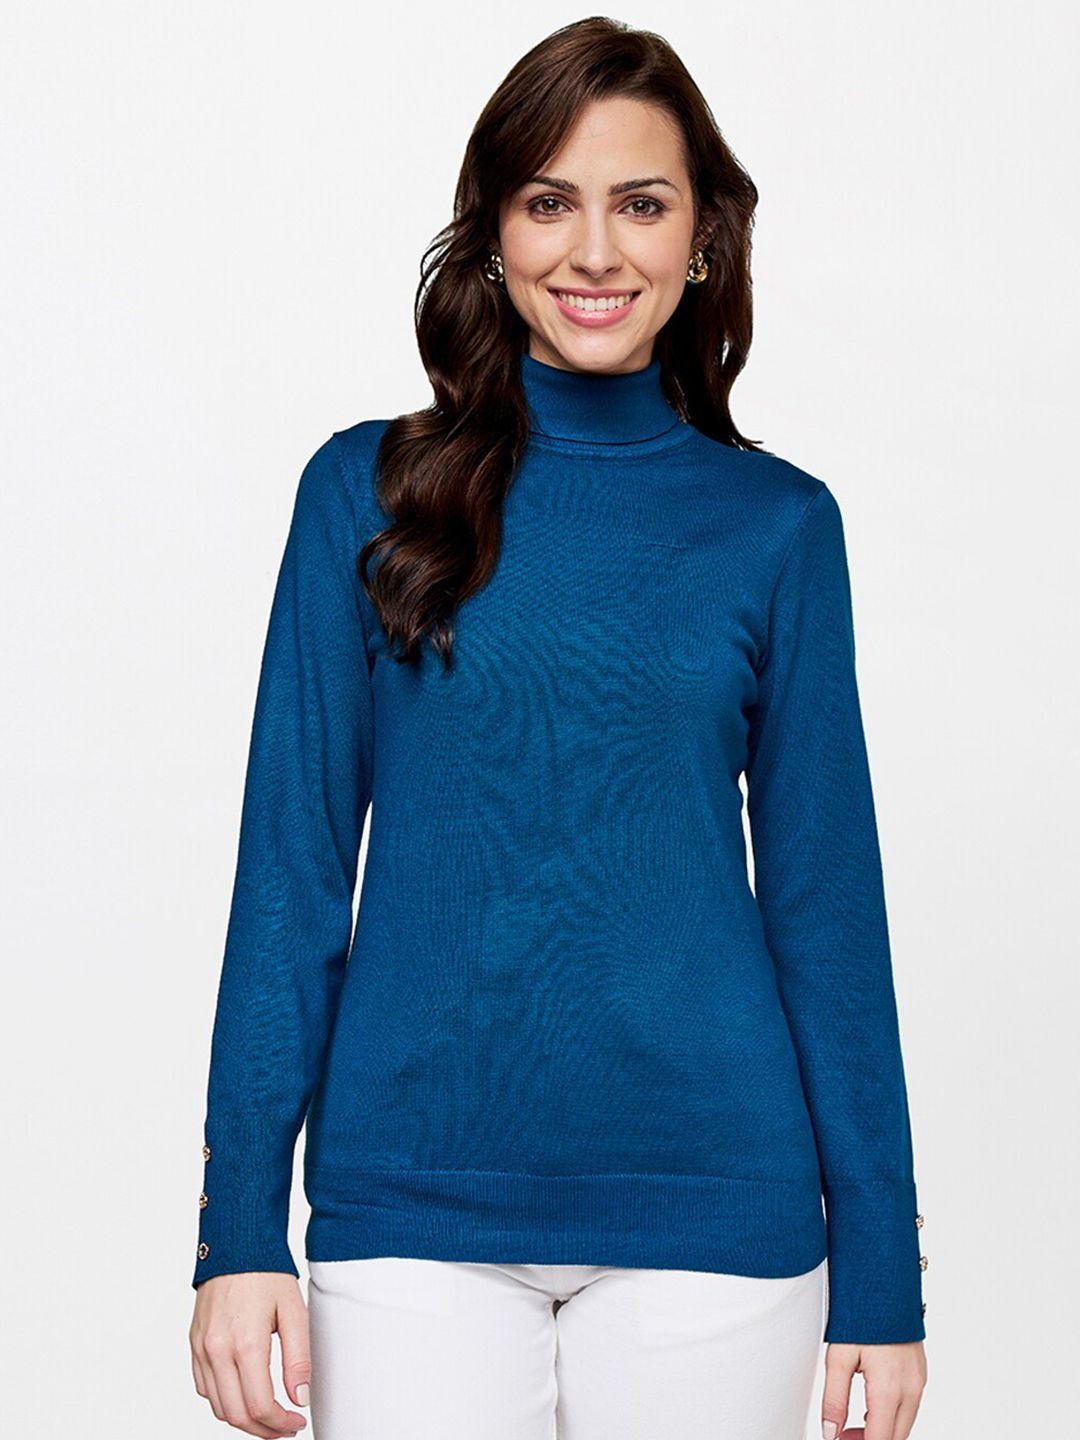 AND Teal Solid Turtle Neck Regular Top